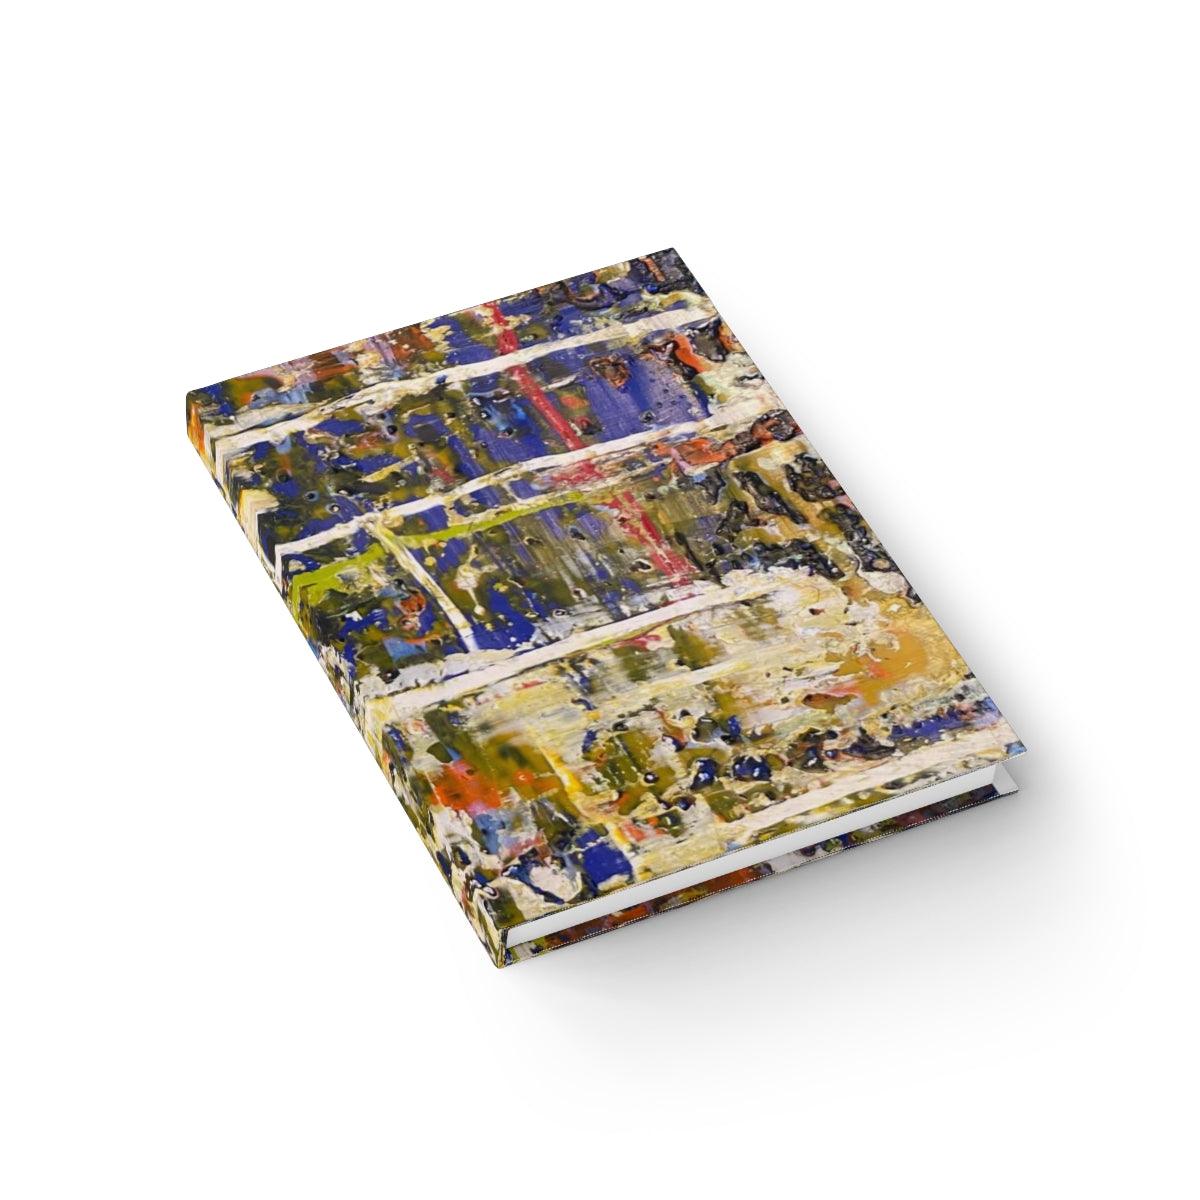 "Urban Tribes" Journal - Ruled Line-Paper products - Mike Giannella - Encaustic Painting - Mixed Media Artist - Art Prints